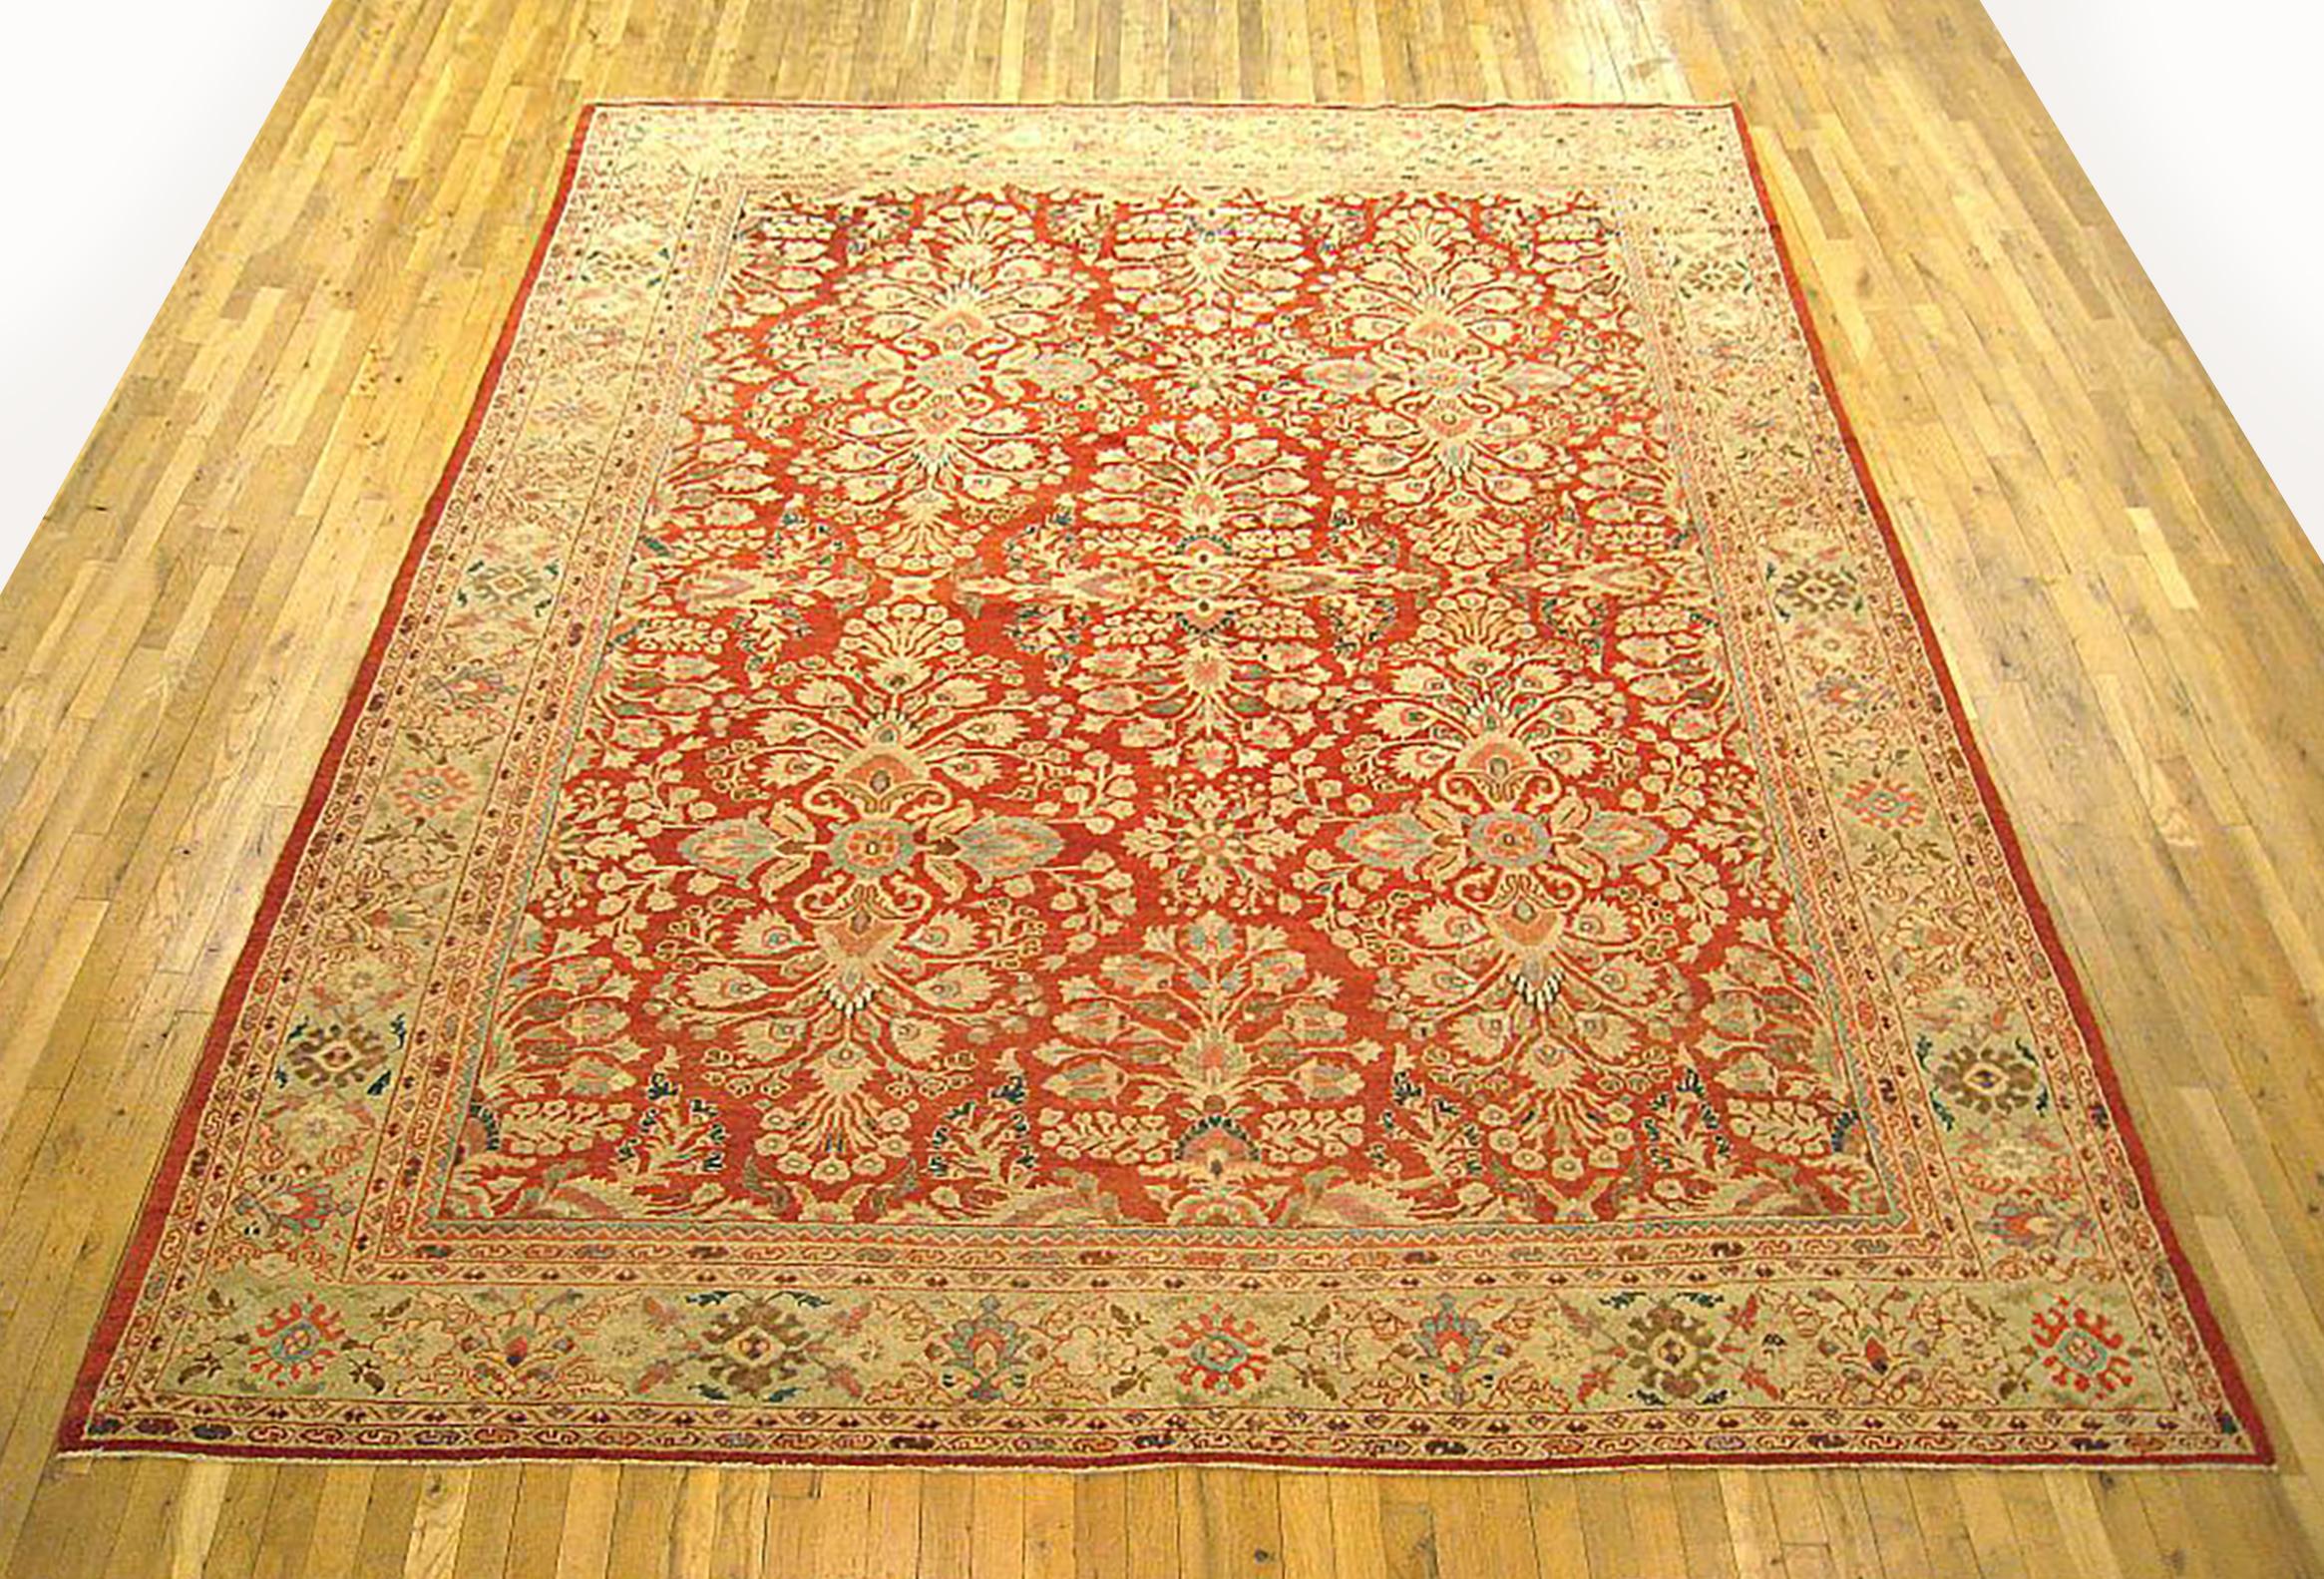 Antique Persian Sultanabad rug, large size, circa 1920

A one-of-a-kind antique Persian Sultanabad oriental carpet with a thick and lustrous wool pile, knotted by hand, with soft touch and great resistance to wear. This carpet features floral